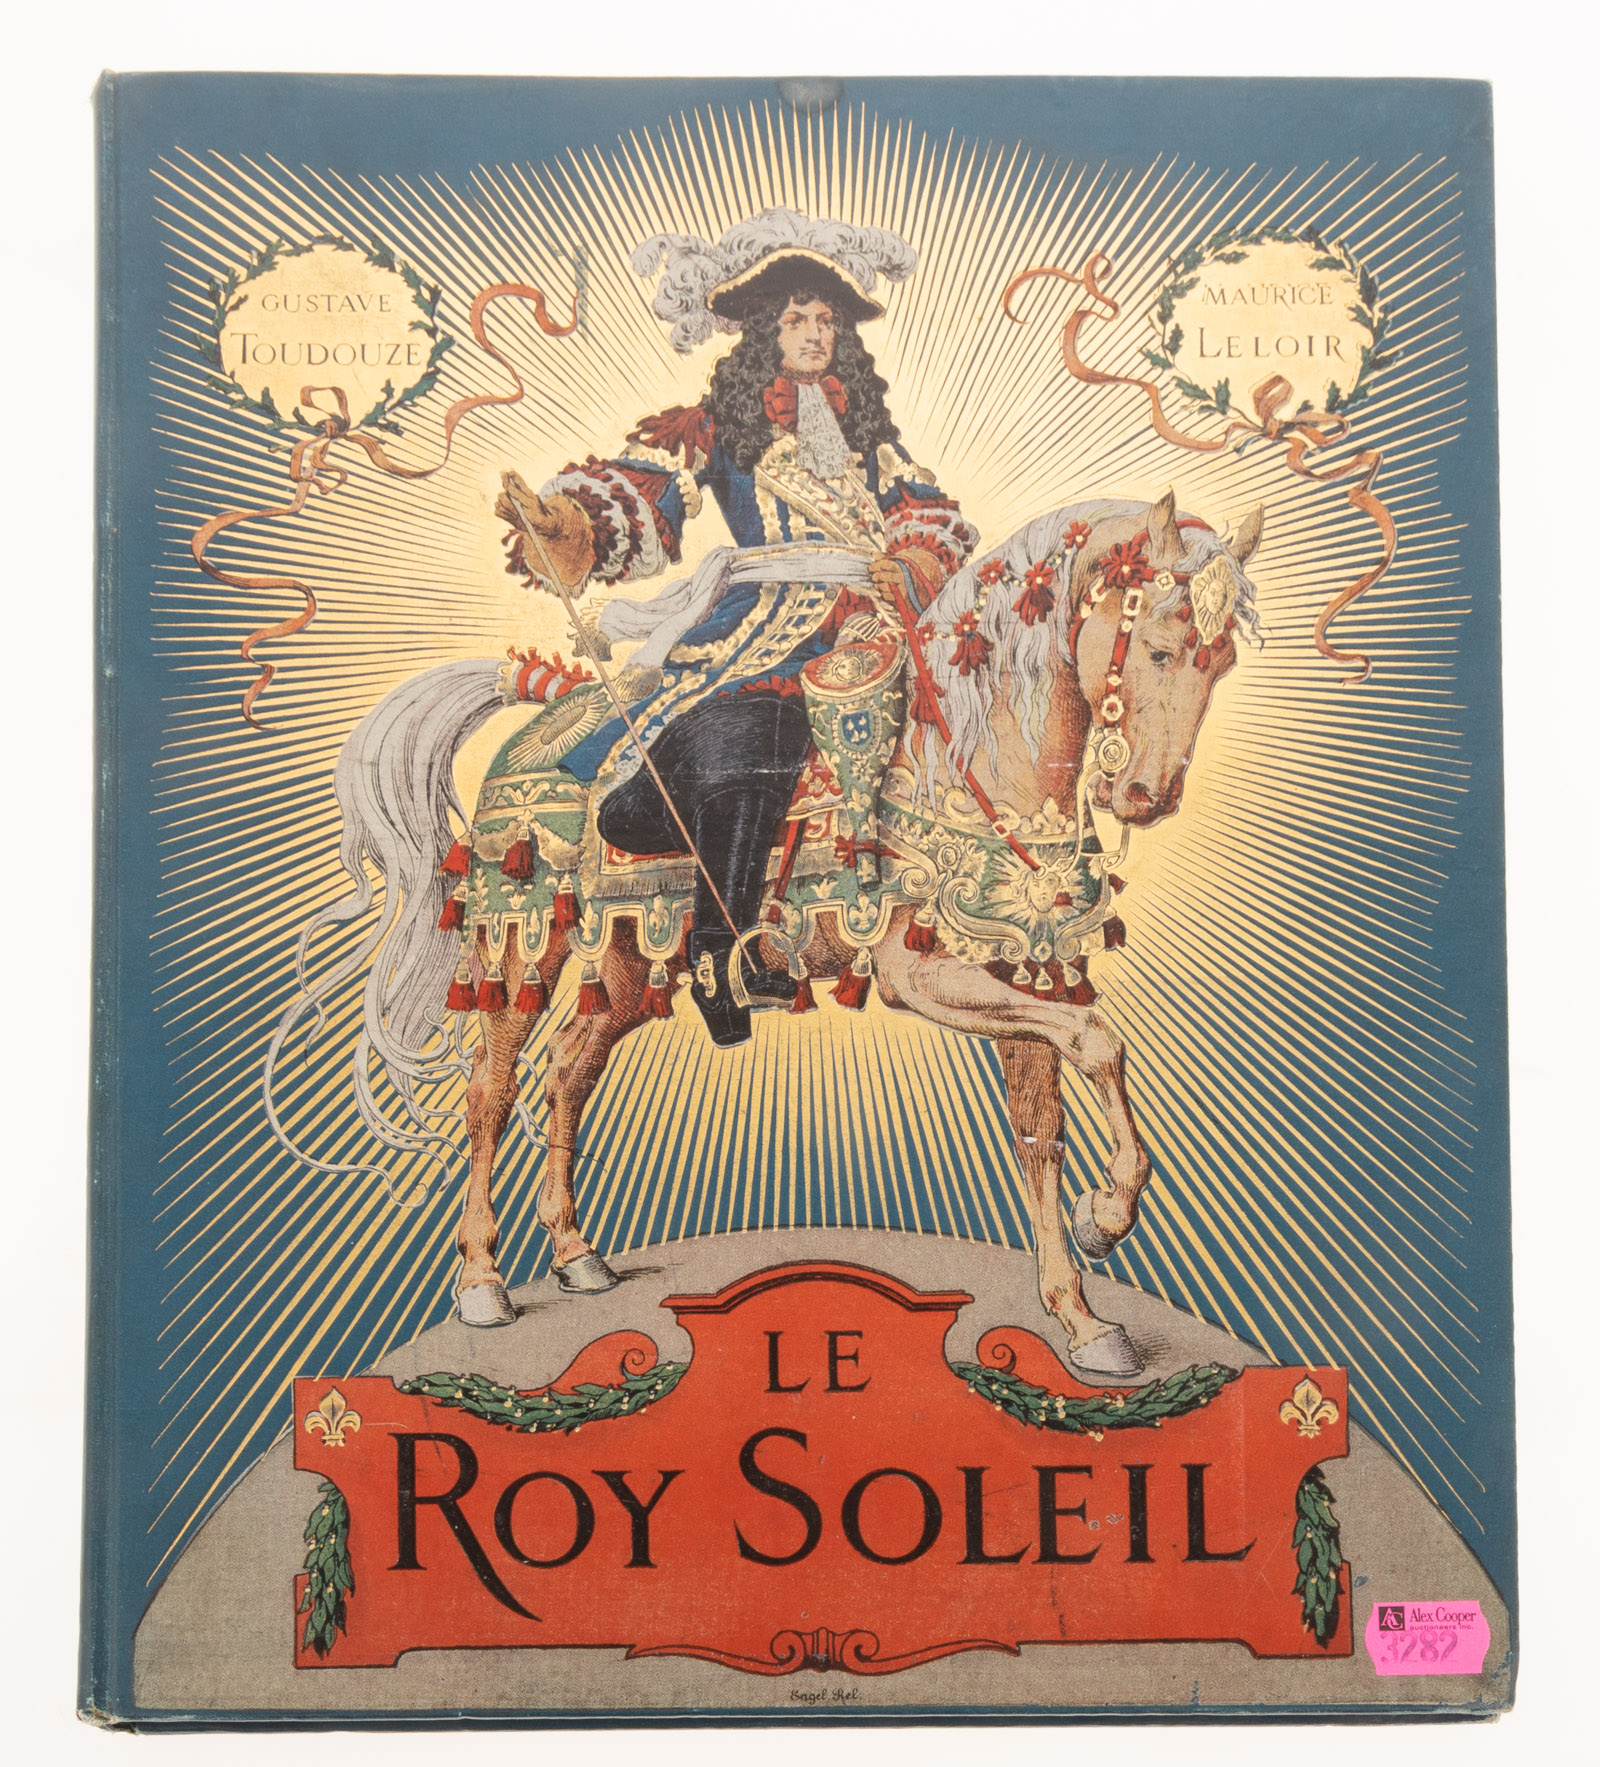 FRENCH HISTORY BOOK, "LE ROY SOLEIL"